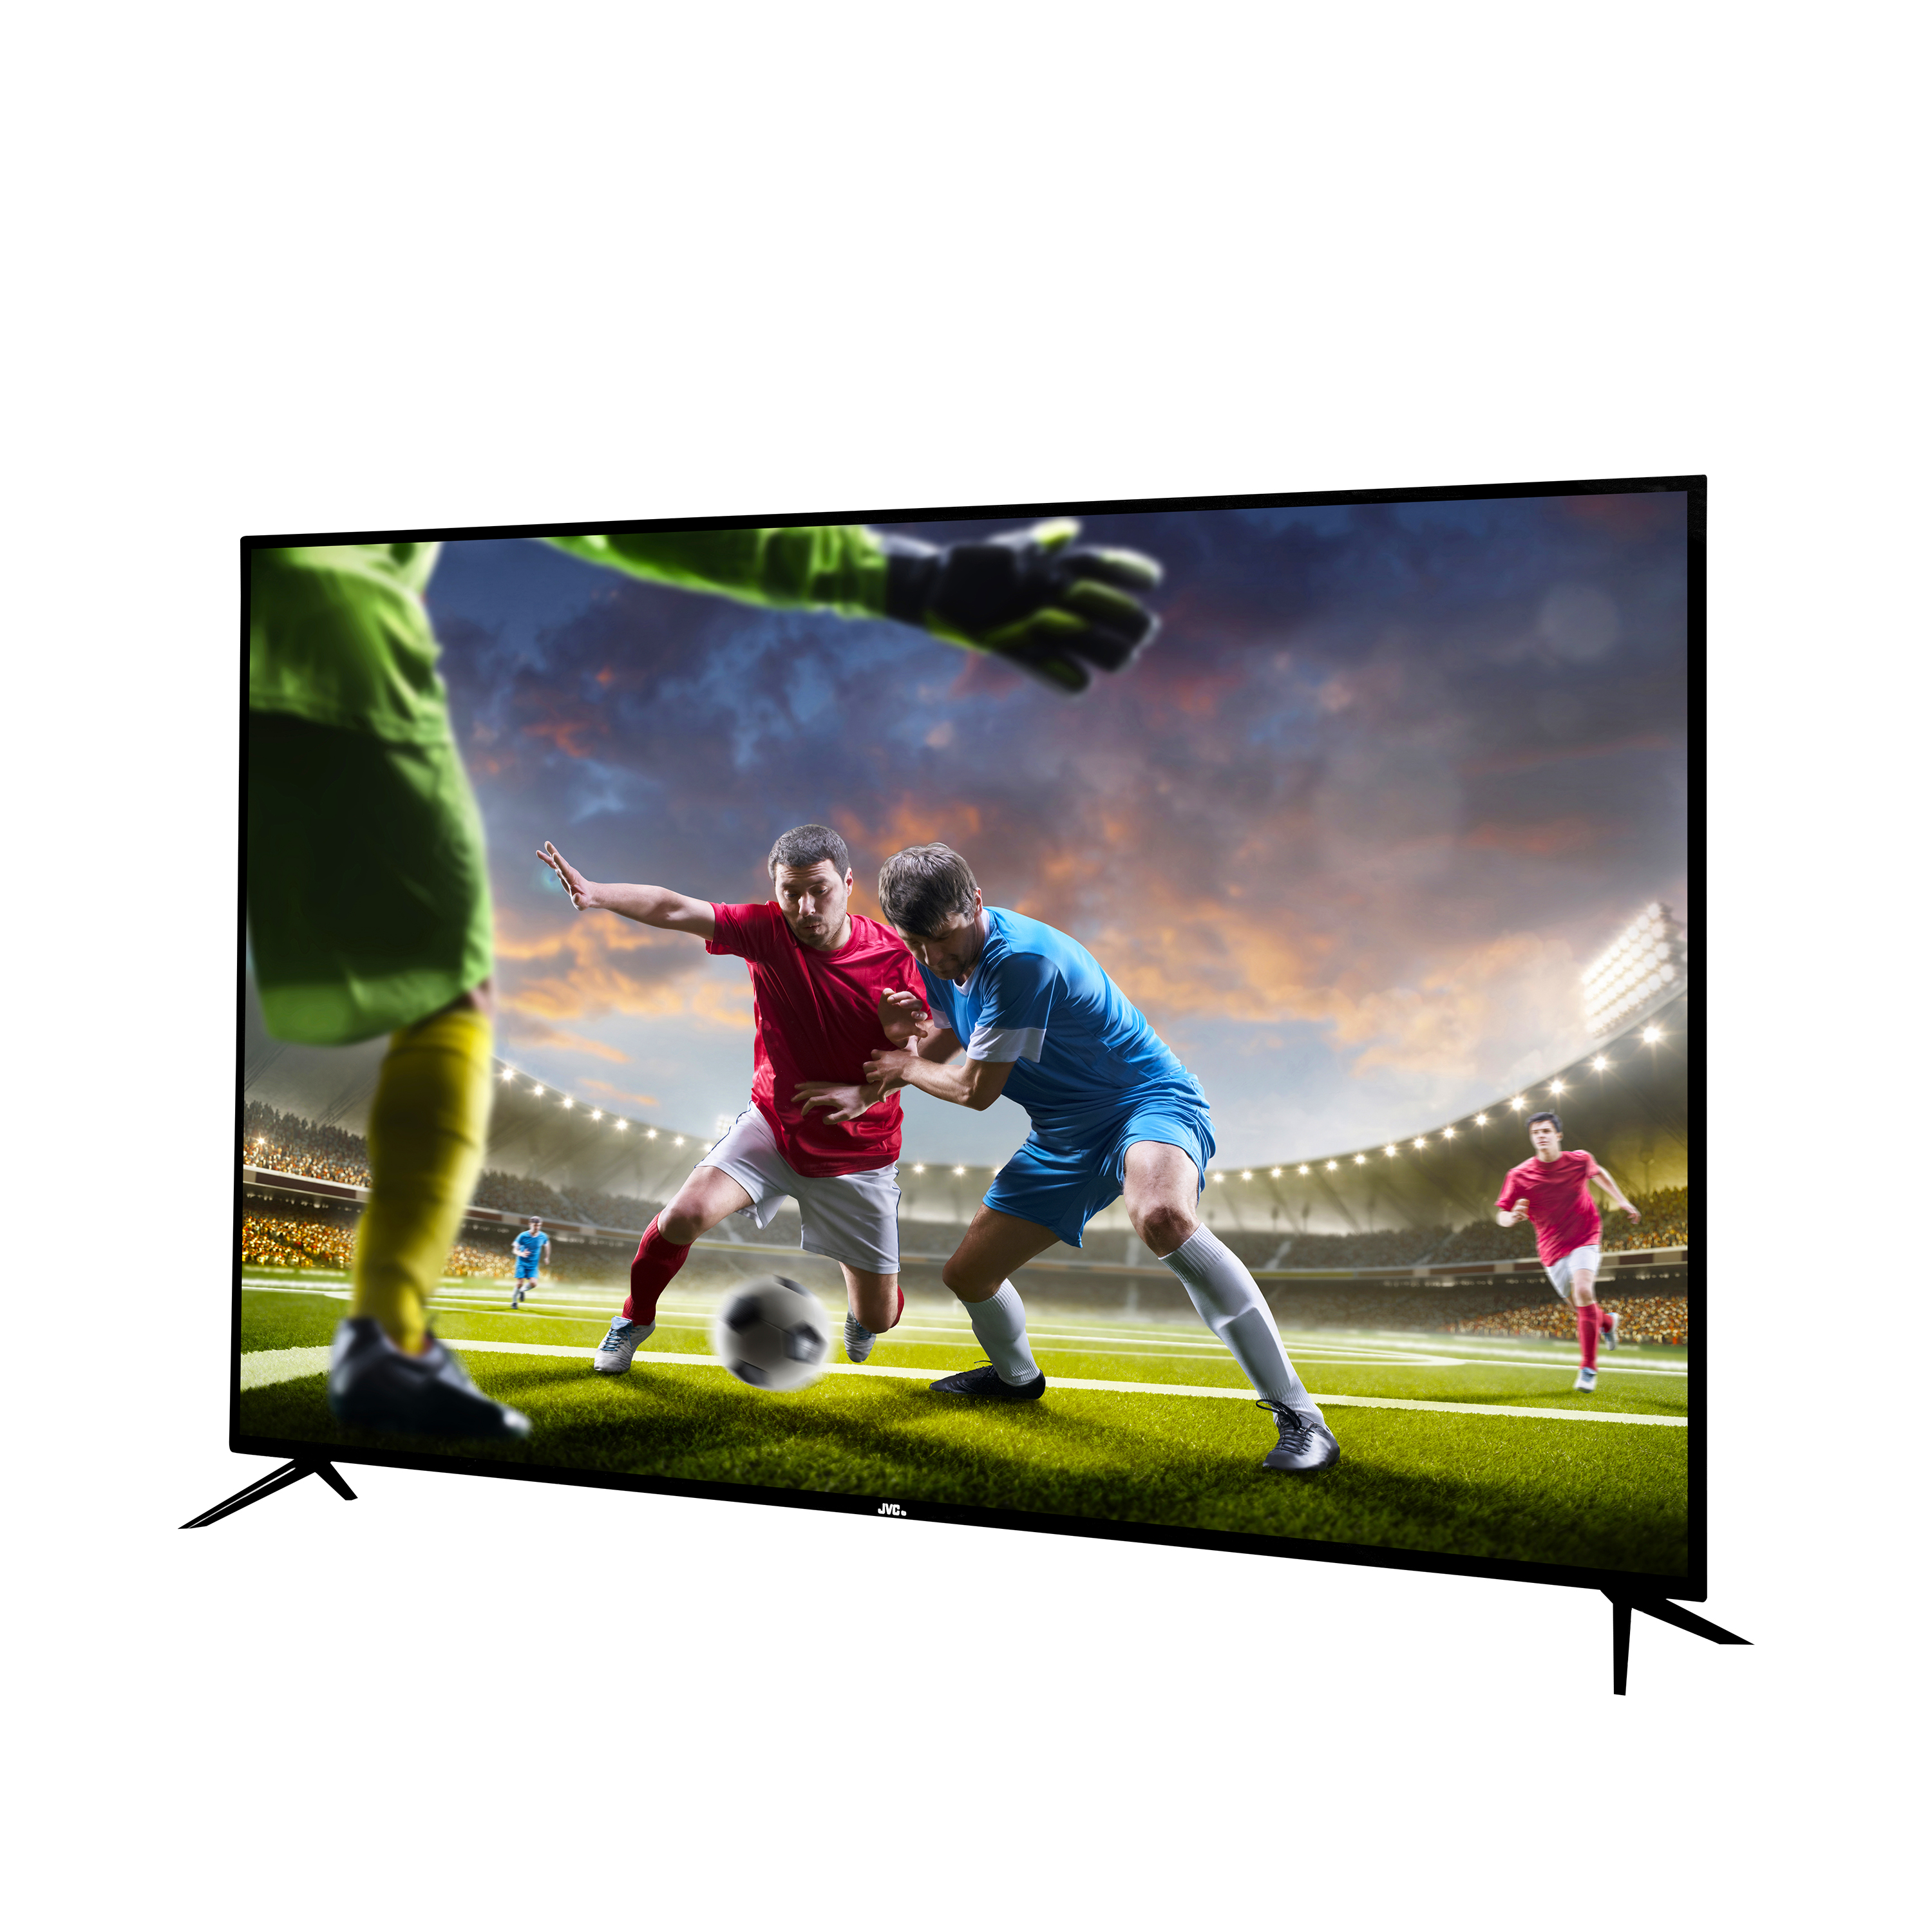 JVC 65" Class 4K Ultra HD (2160p) HDR Smart LED TV with Built-in Chromecast (LT-65MA875) - image 4 of 8